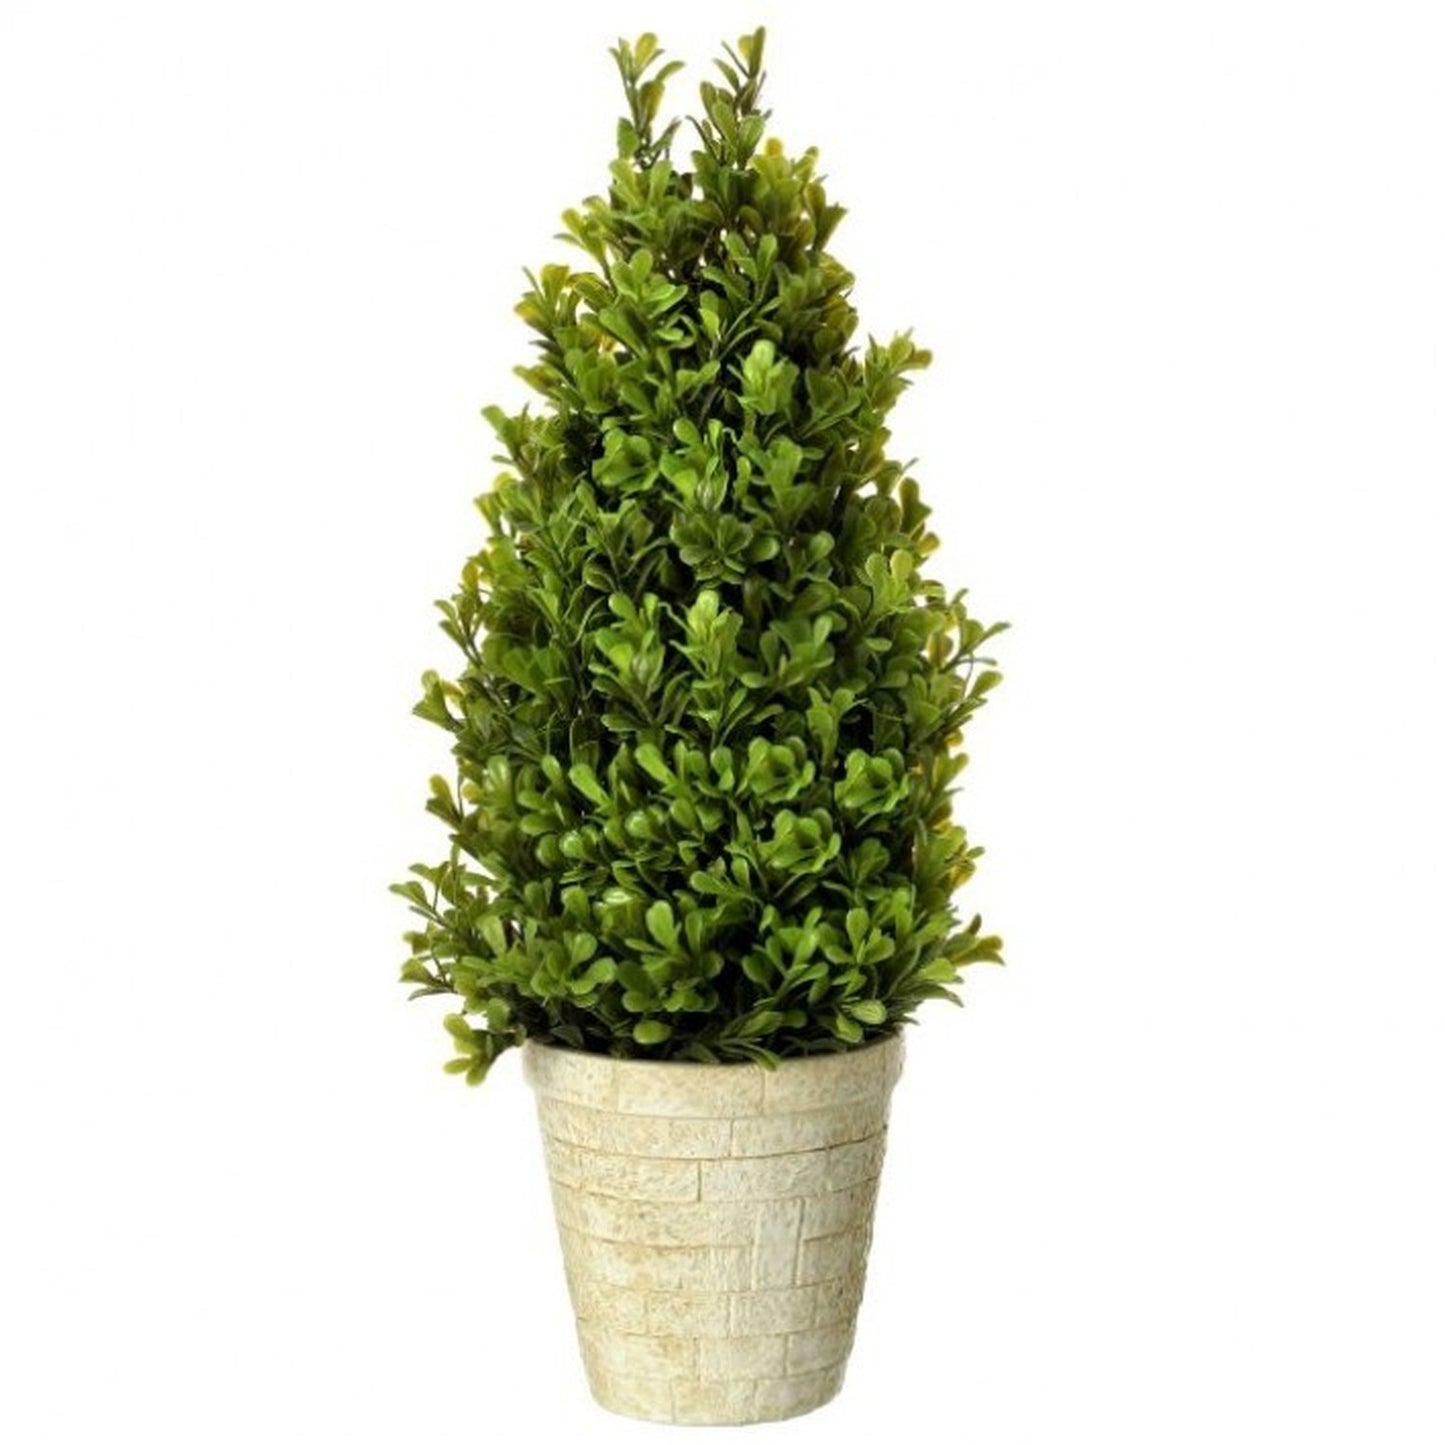 Regency International Potted Plant Spring Boxwood Cone Topiary